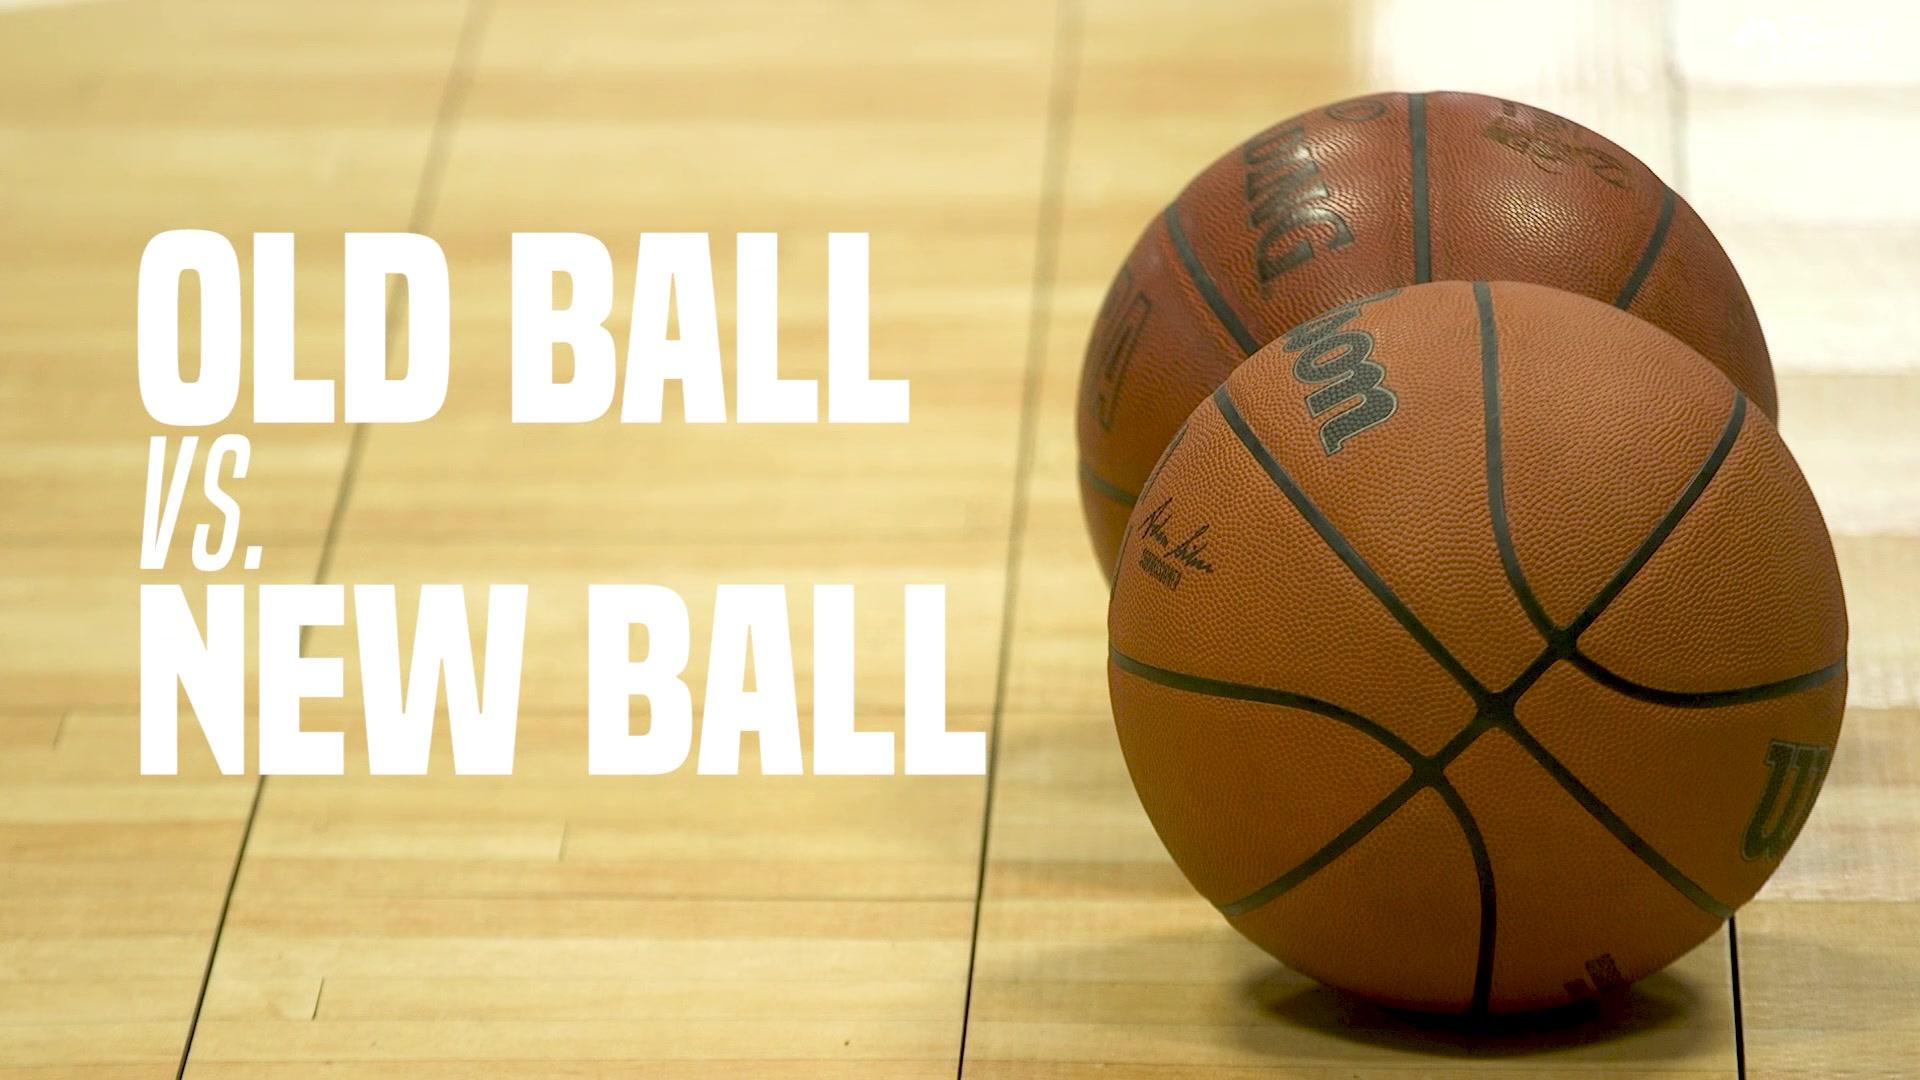 NBA: Wilson ball switch from Spalding to blame for shooting slumps?